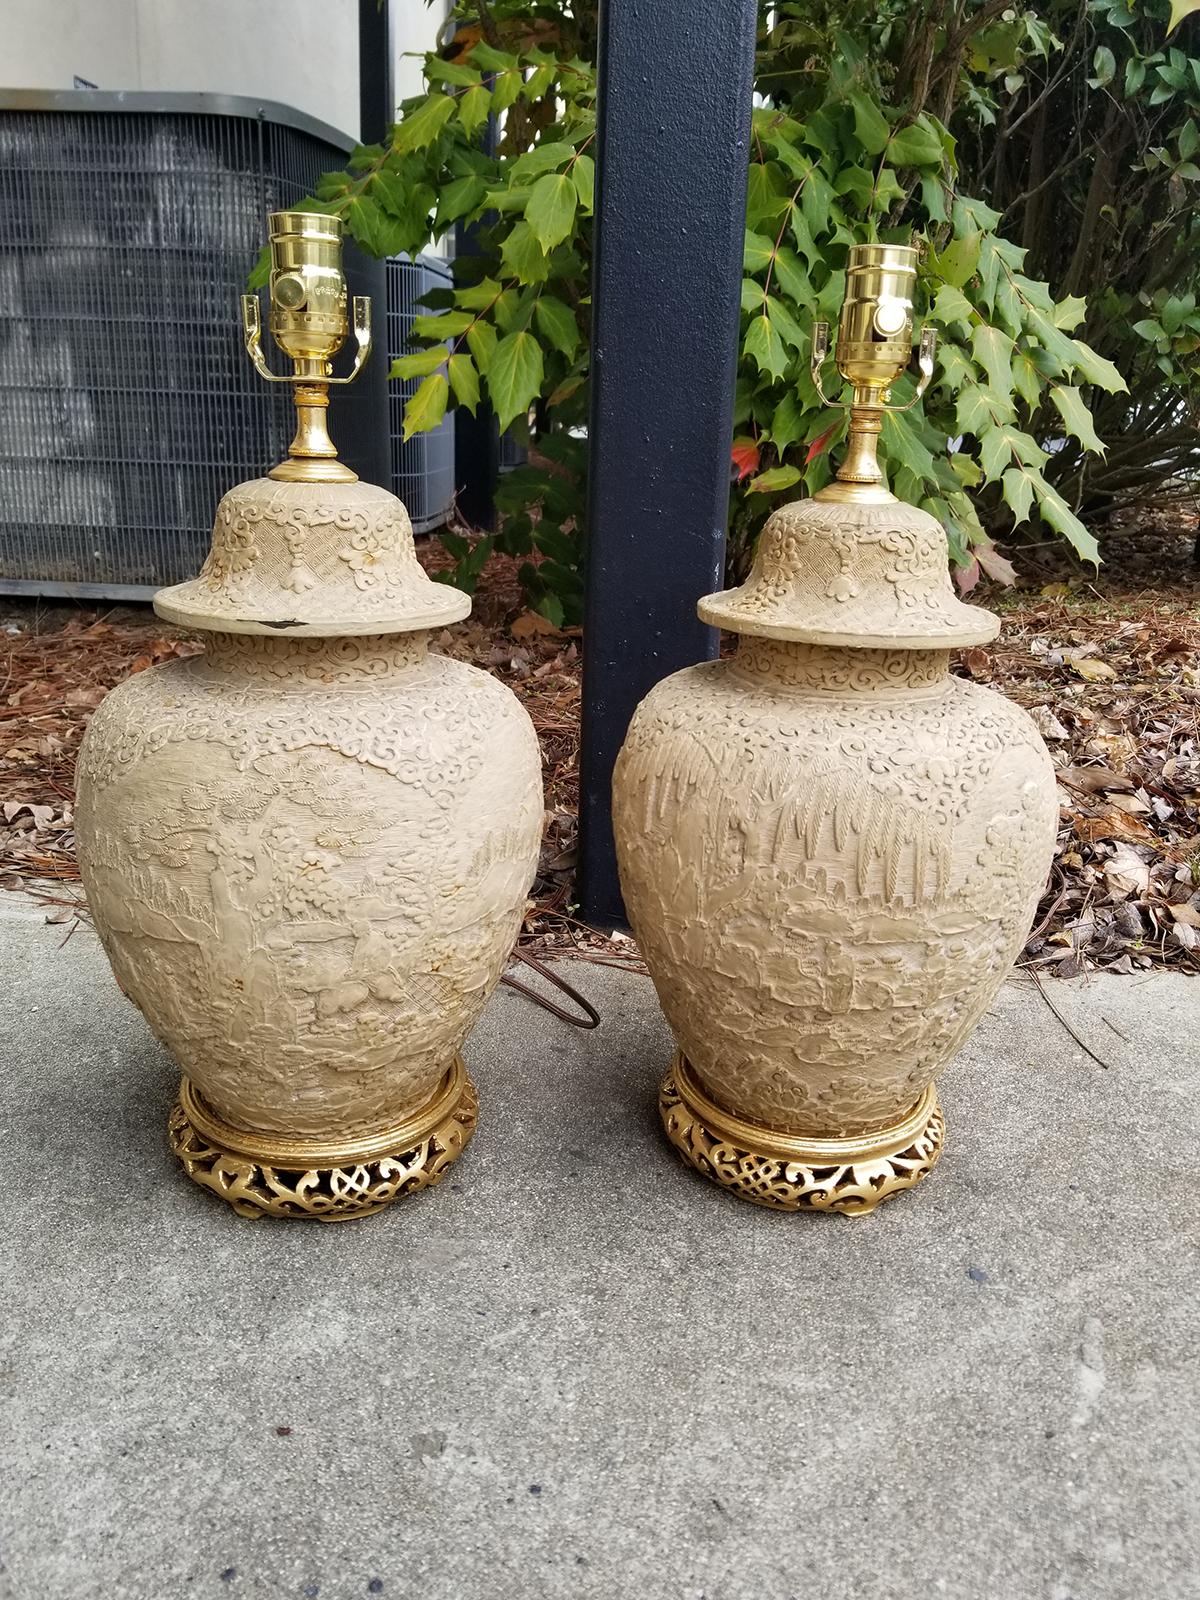 Pair of Chinese carved wood lamps with gilded bases, circa 1880-1920
Brand new wiring.